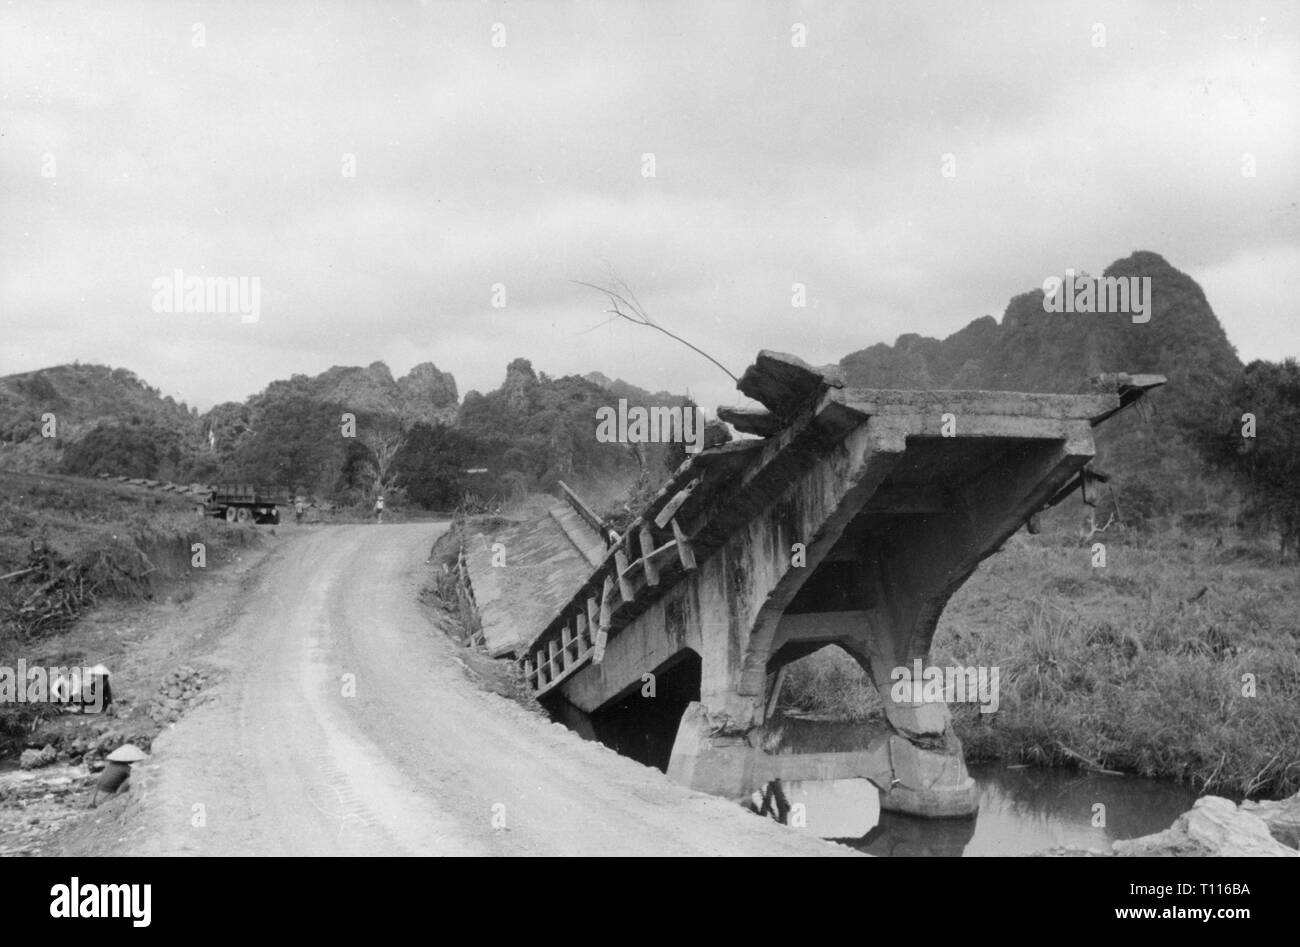 Indochina War 1946 - 1954, Battle of Hoa Binh, 10.11.1951 - 25.2.1952, remains of a blown up bridge at the Colonial Route 6, Hoa Binh province, view, 1952, Route Coloniale, blasting, exploding, shooting, blastings, explodings, ruin, ruins, destruction, destructions, war damage, Viet Nam, Vietnam, Indochina, war, wars, 20th century, 1950s, battle, battles, bridge, bridges, view, views, historic, historical, Additional-Rights-Clearance-Info-Not-Available Stock Photo